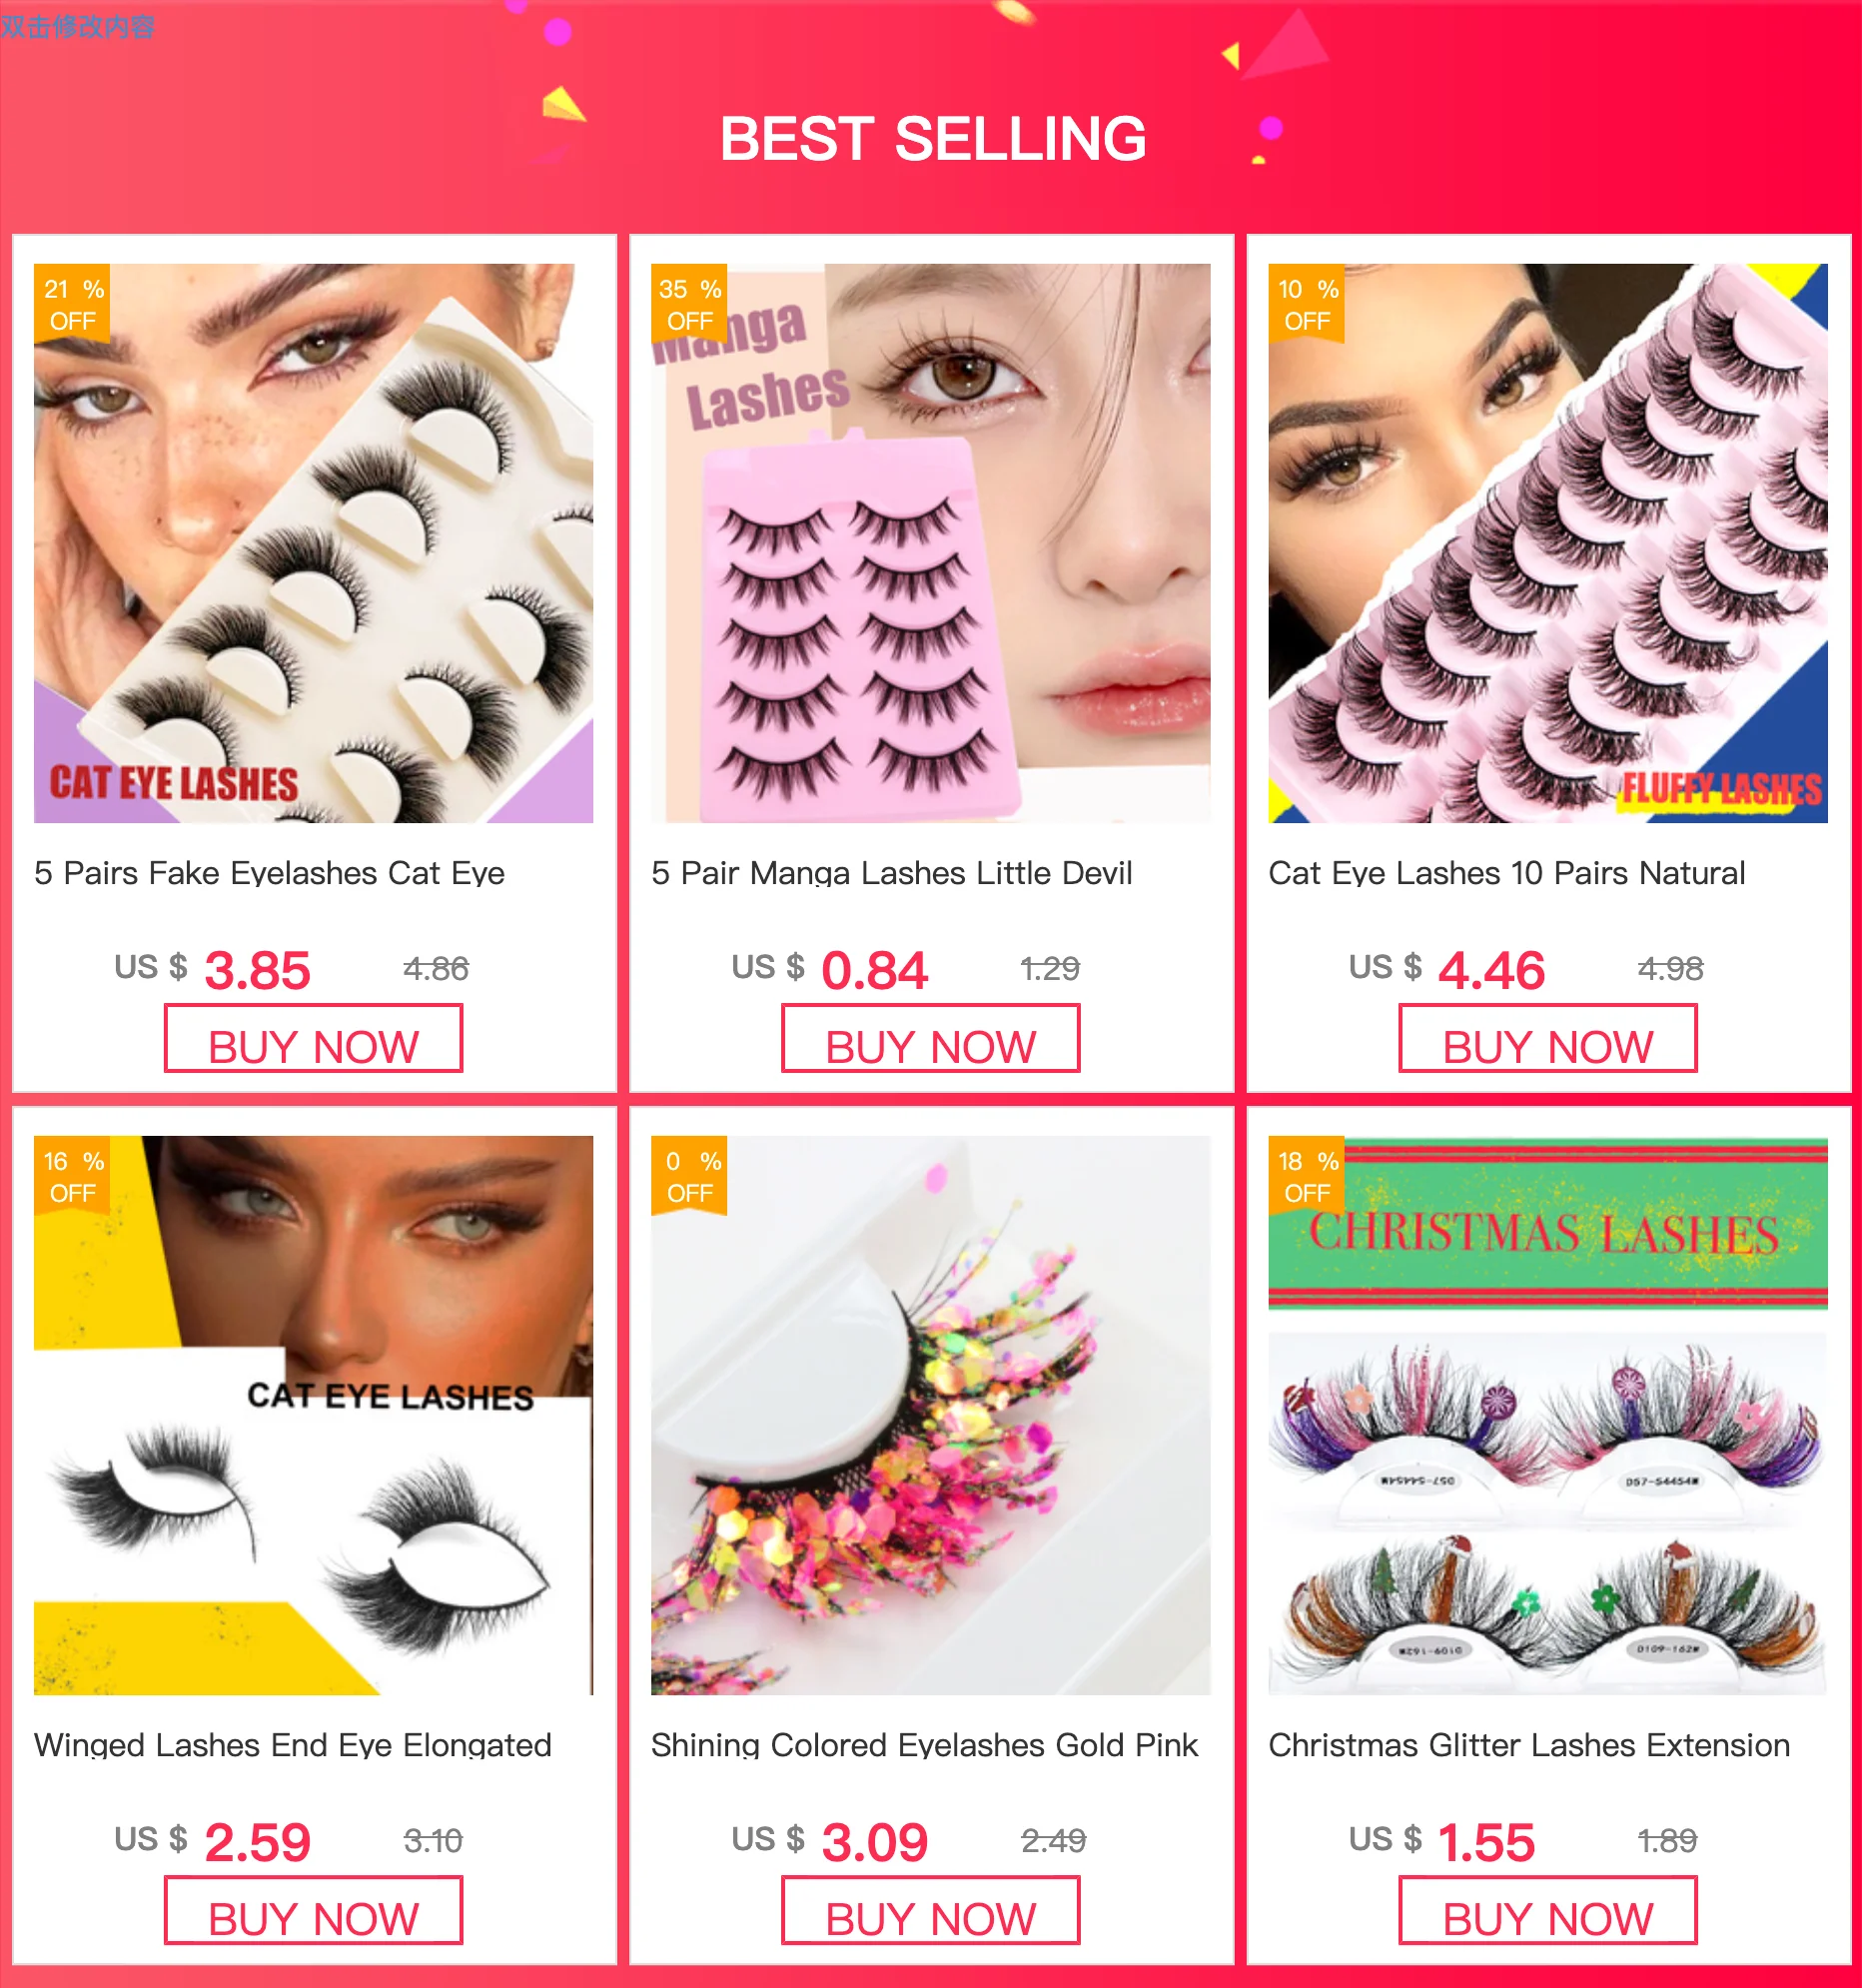 Cosplay&ware 5 Pair Manga Lashes Little Devil Anime Cosplay Natural Wispy Fairy Cross Korean Makeup Fake Eyelashes -Outlet Maid Outfit Store S4d68d869356943ee99b245b21423c3906.jpg